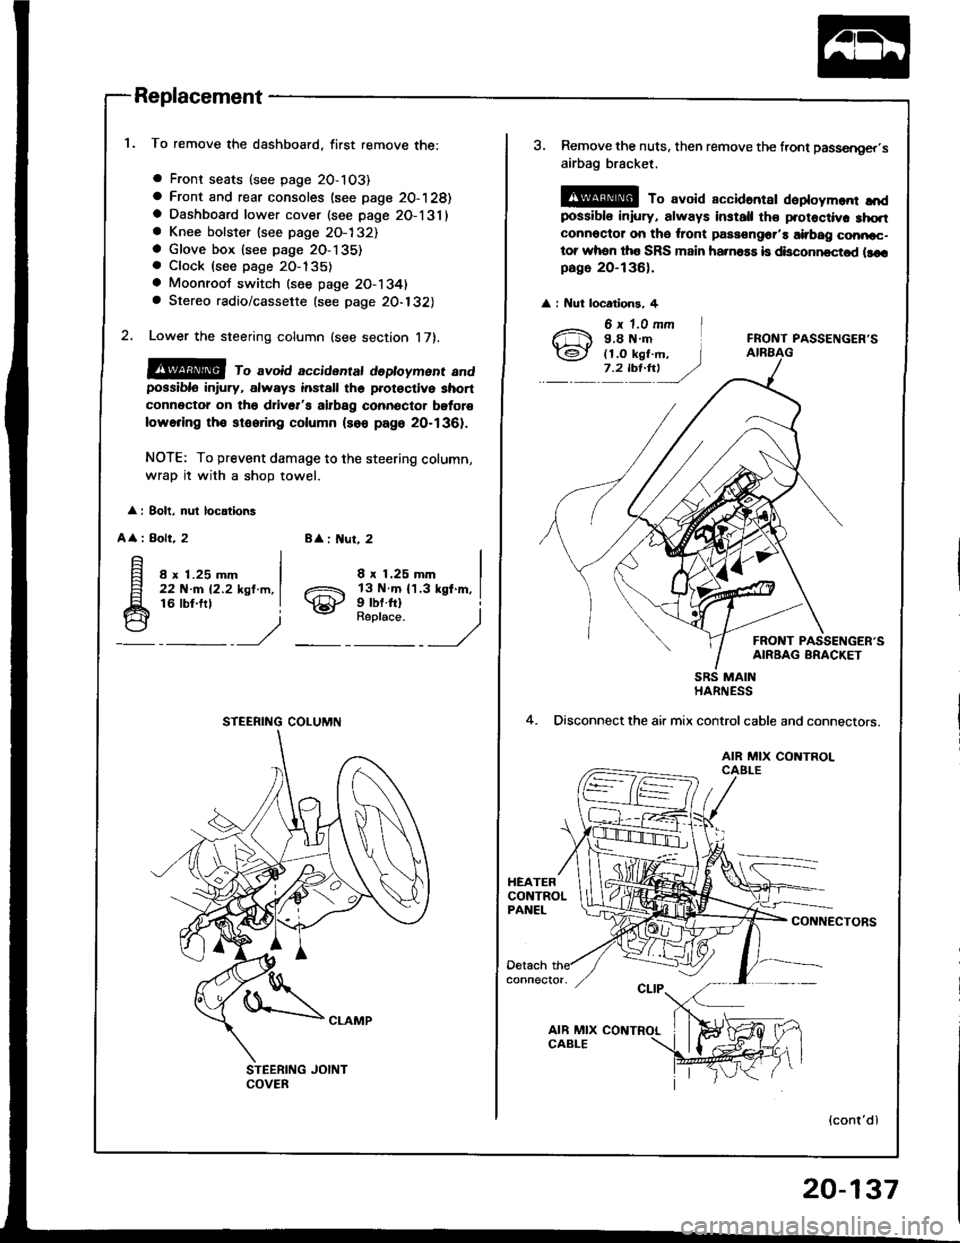 HONDA INTEGRA 1994 4.G Workshop Manual Replacement
To remove the dashboard, first remove the:
a Front seats (see page 2O-103)
a Front and rear consoles (see page 20-128)a Dashboard lower cover (see page 2O-131)a Knee bolster (see page 2O-1